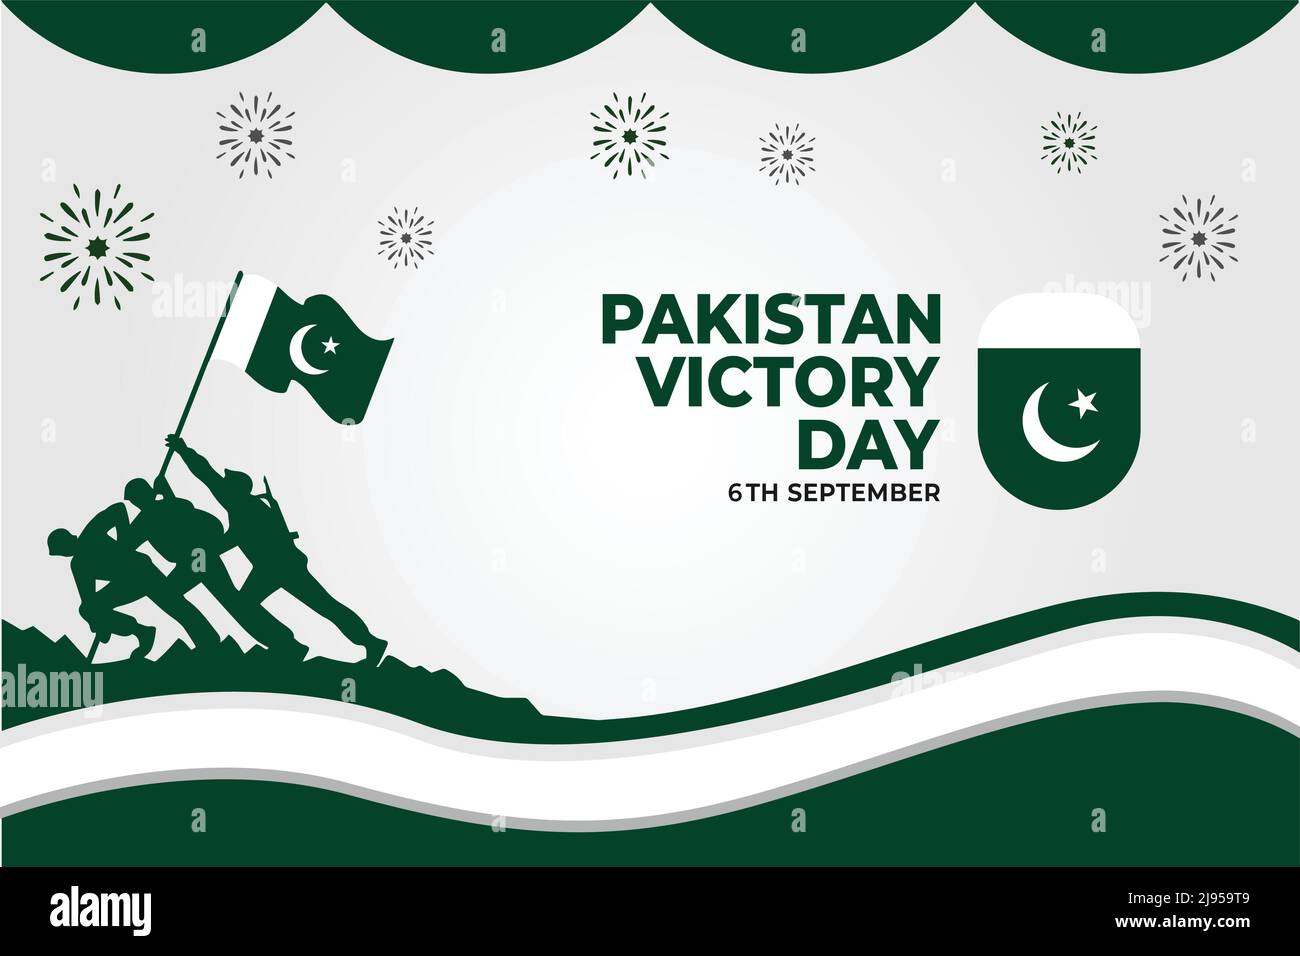 Pakistan victory day with Pak soldier Stock Vector